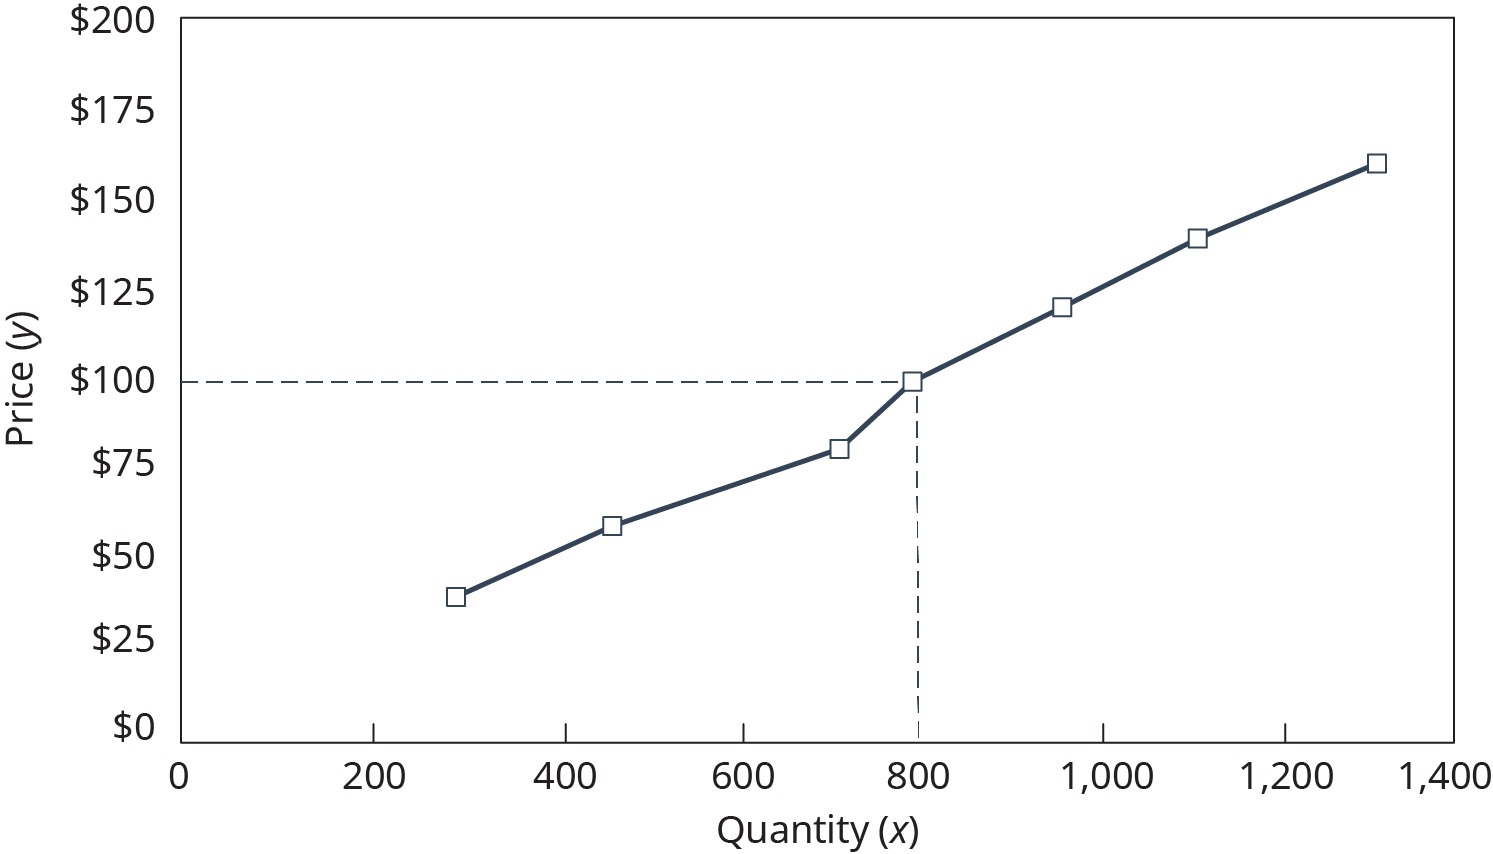 The horizontal x axis is labeled quantity, and is labeled from left to right, 0 to 1,400 in increments of 200. The vertical y axis is labeled price, and is labeled, from bottom to top, 0 dollars to 200 dollars in increments of $25. Points are plotted on the graph, and connected with a solid line. The points are plotted at approximately 275, $40, and 450, $60, and 700, $80, and 800, $100, and 975, $120, and 1100, $135, and 1325, $155. A dashed horizontal line extends from 100 dollars on the y axis, and a vertical dashed line extends from 800 on the x axis and meet at the plotted point 800, $100.